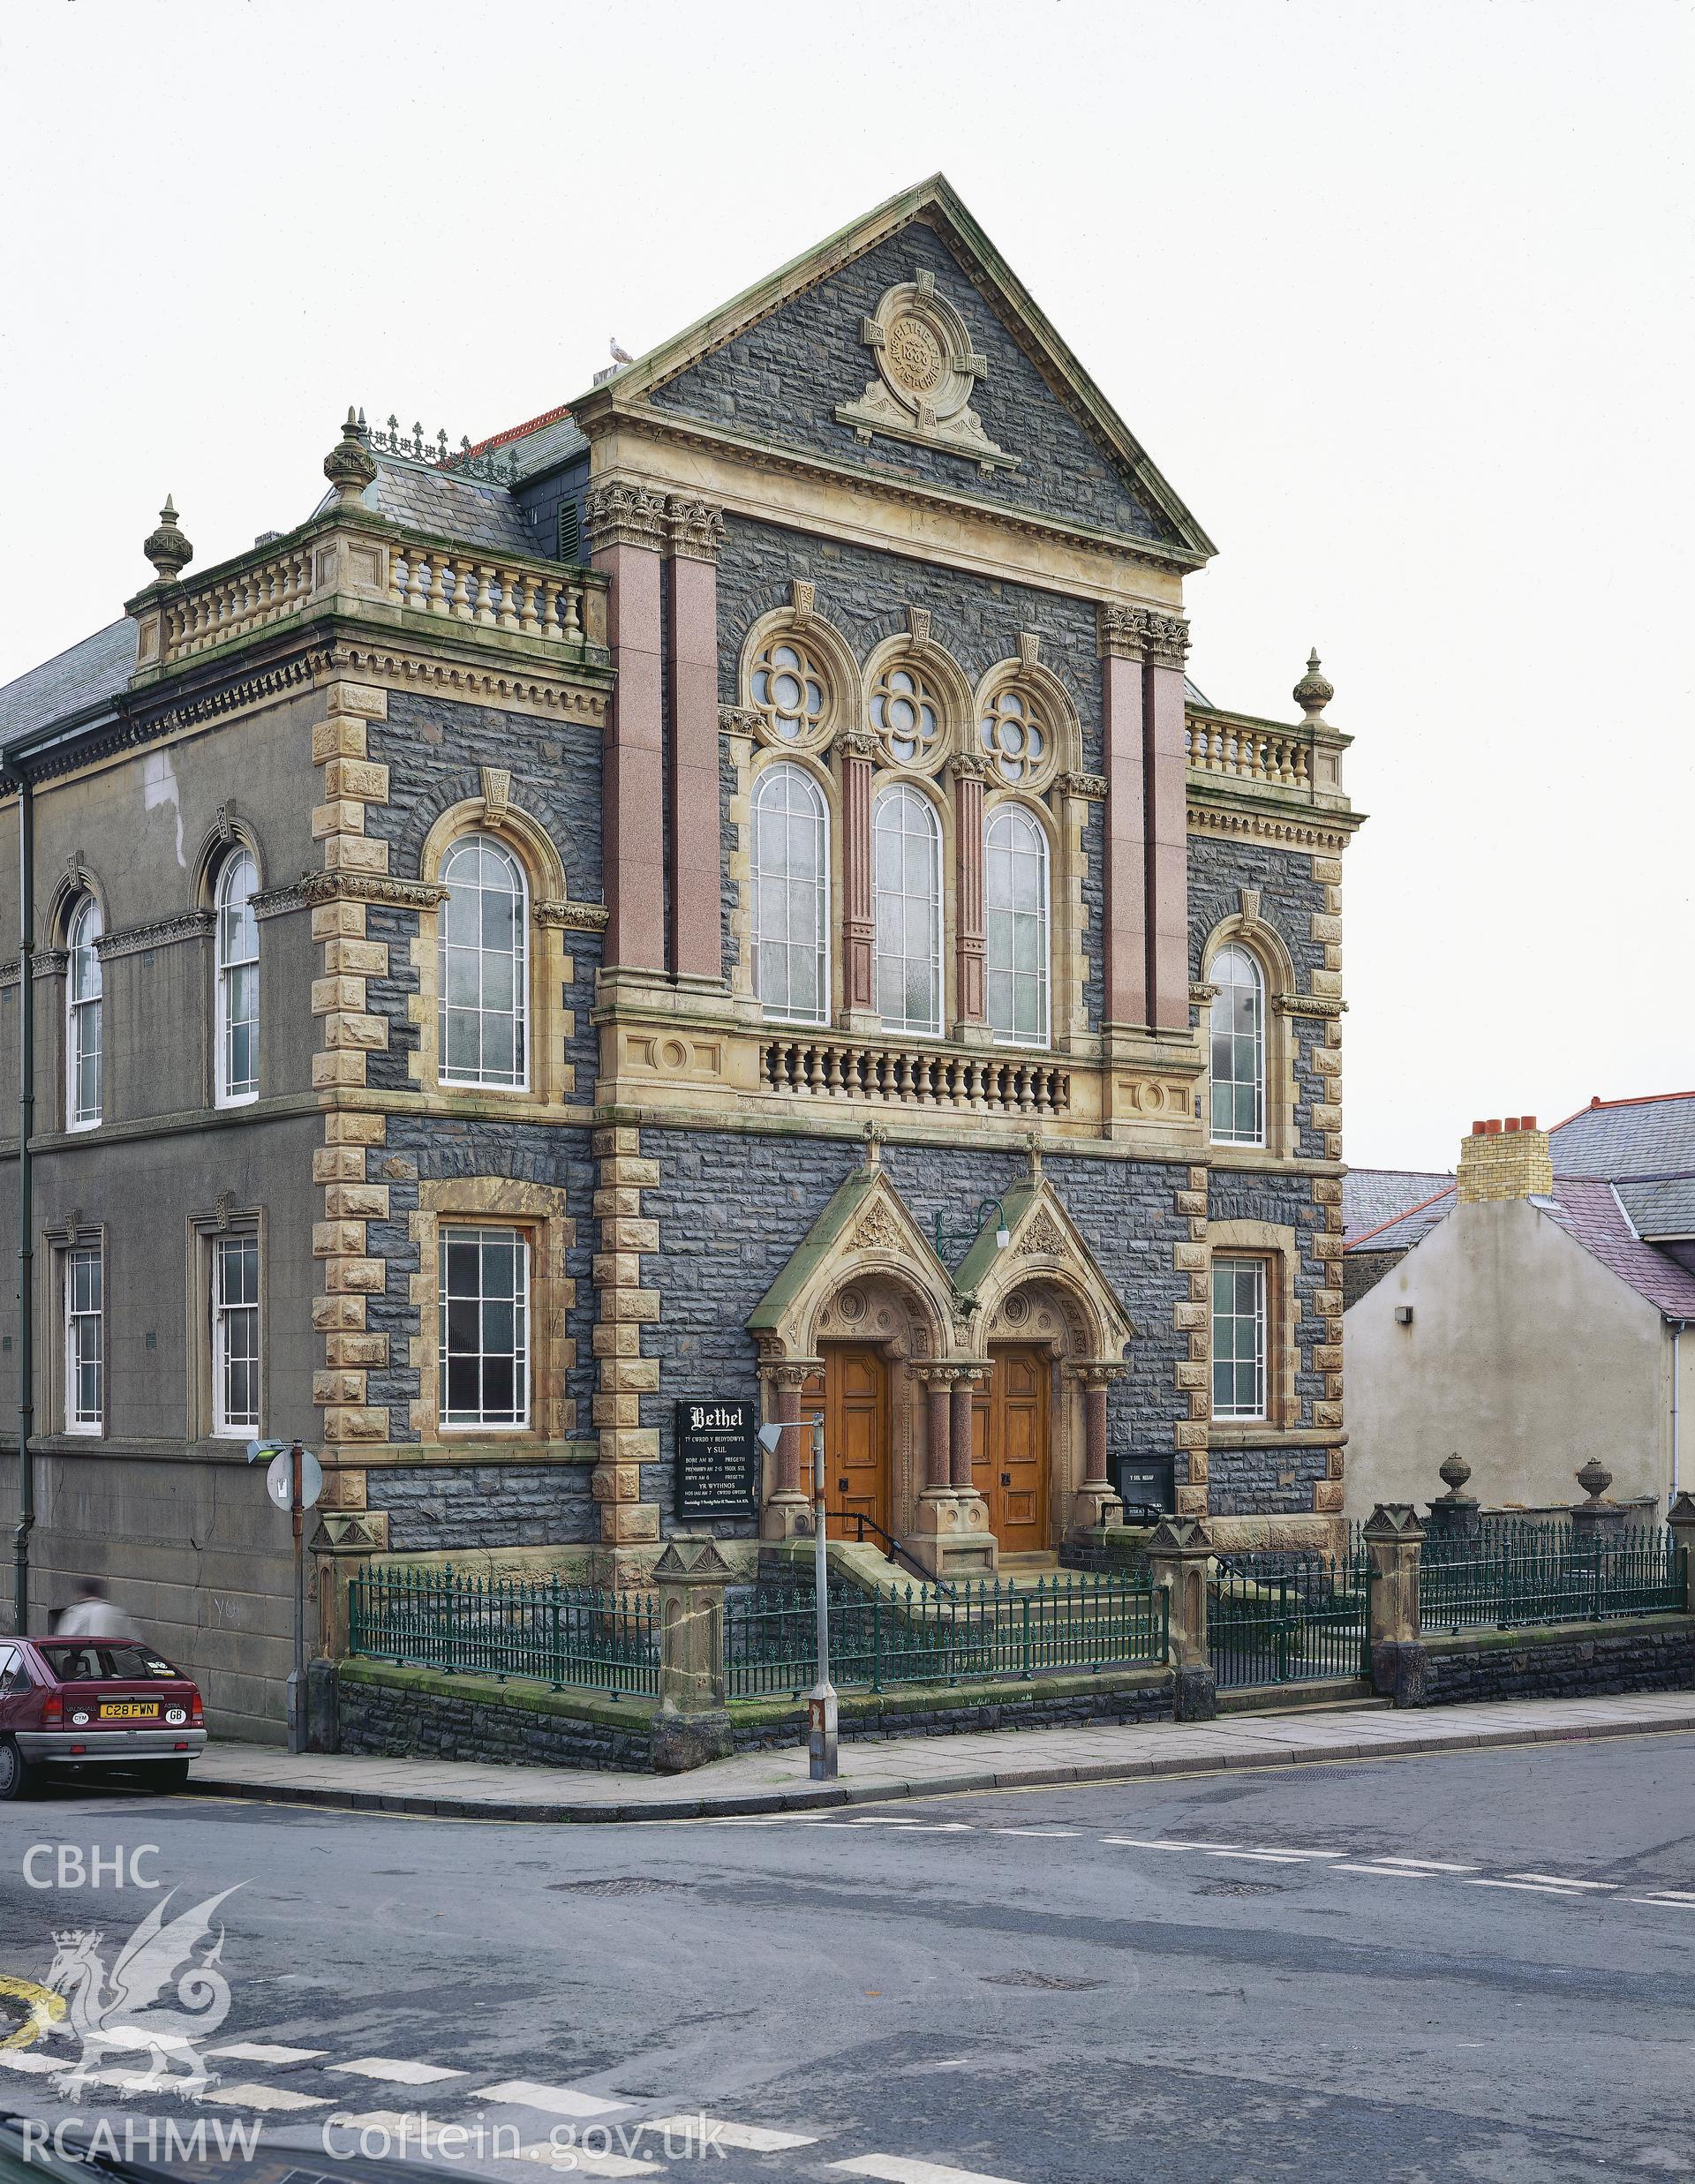 RCAHMW colour transparency of a view of Bethel Chapel, Baker Street, Aberystwyth.